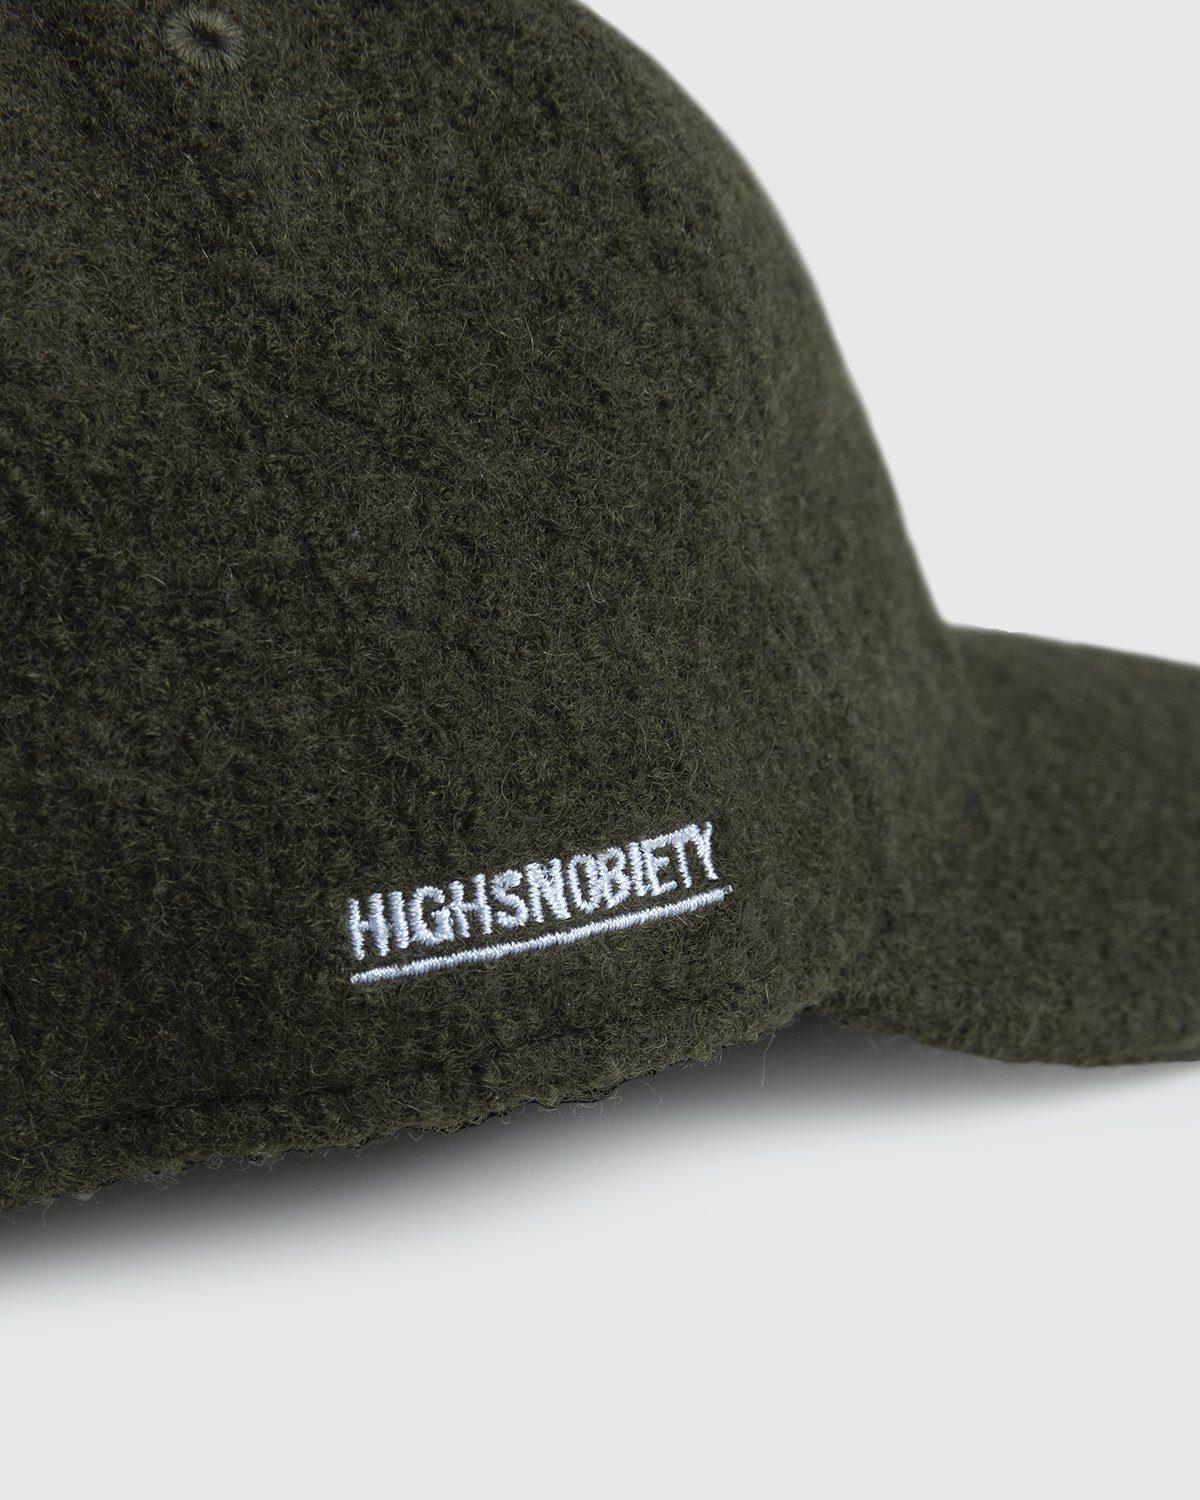 New Era x Highsnobiety - 59Fifty Forest Green - Accessories - Green - Image 7